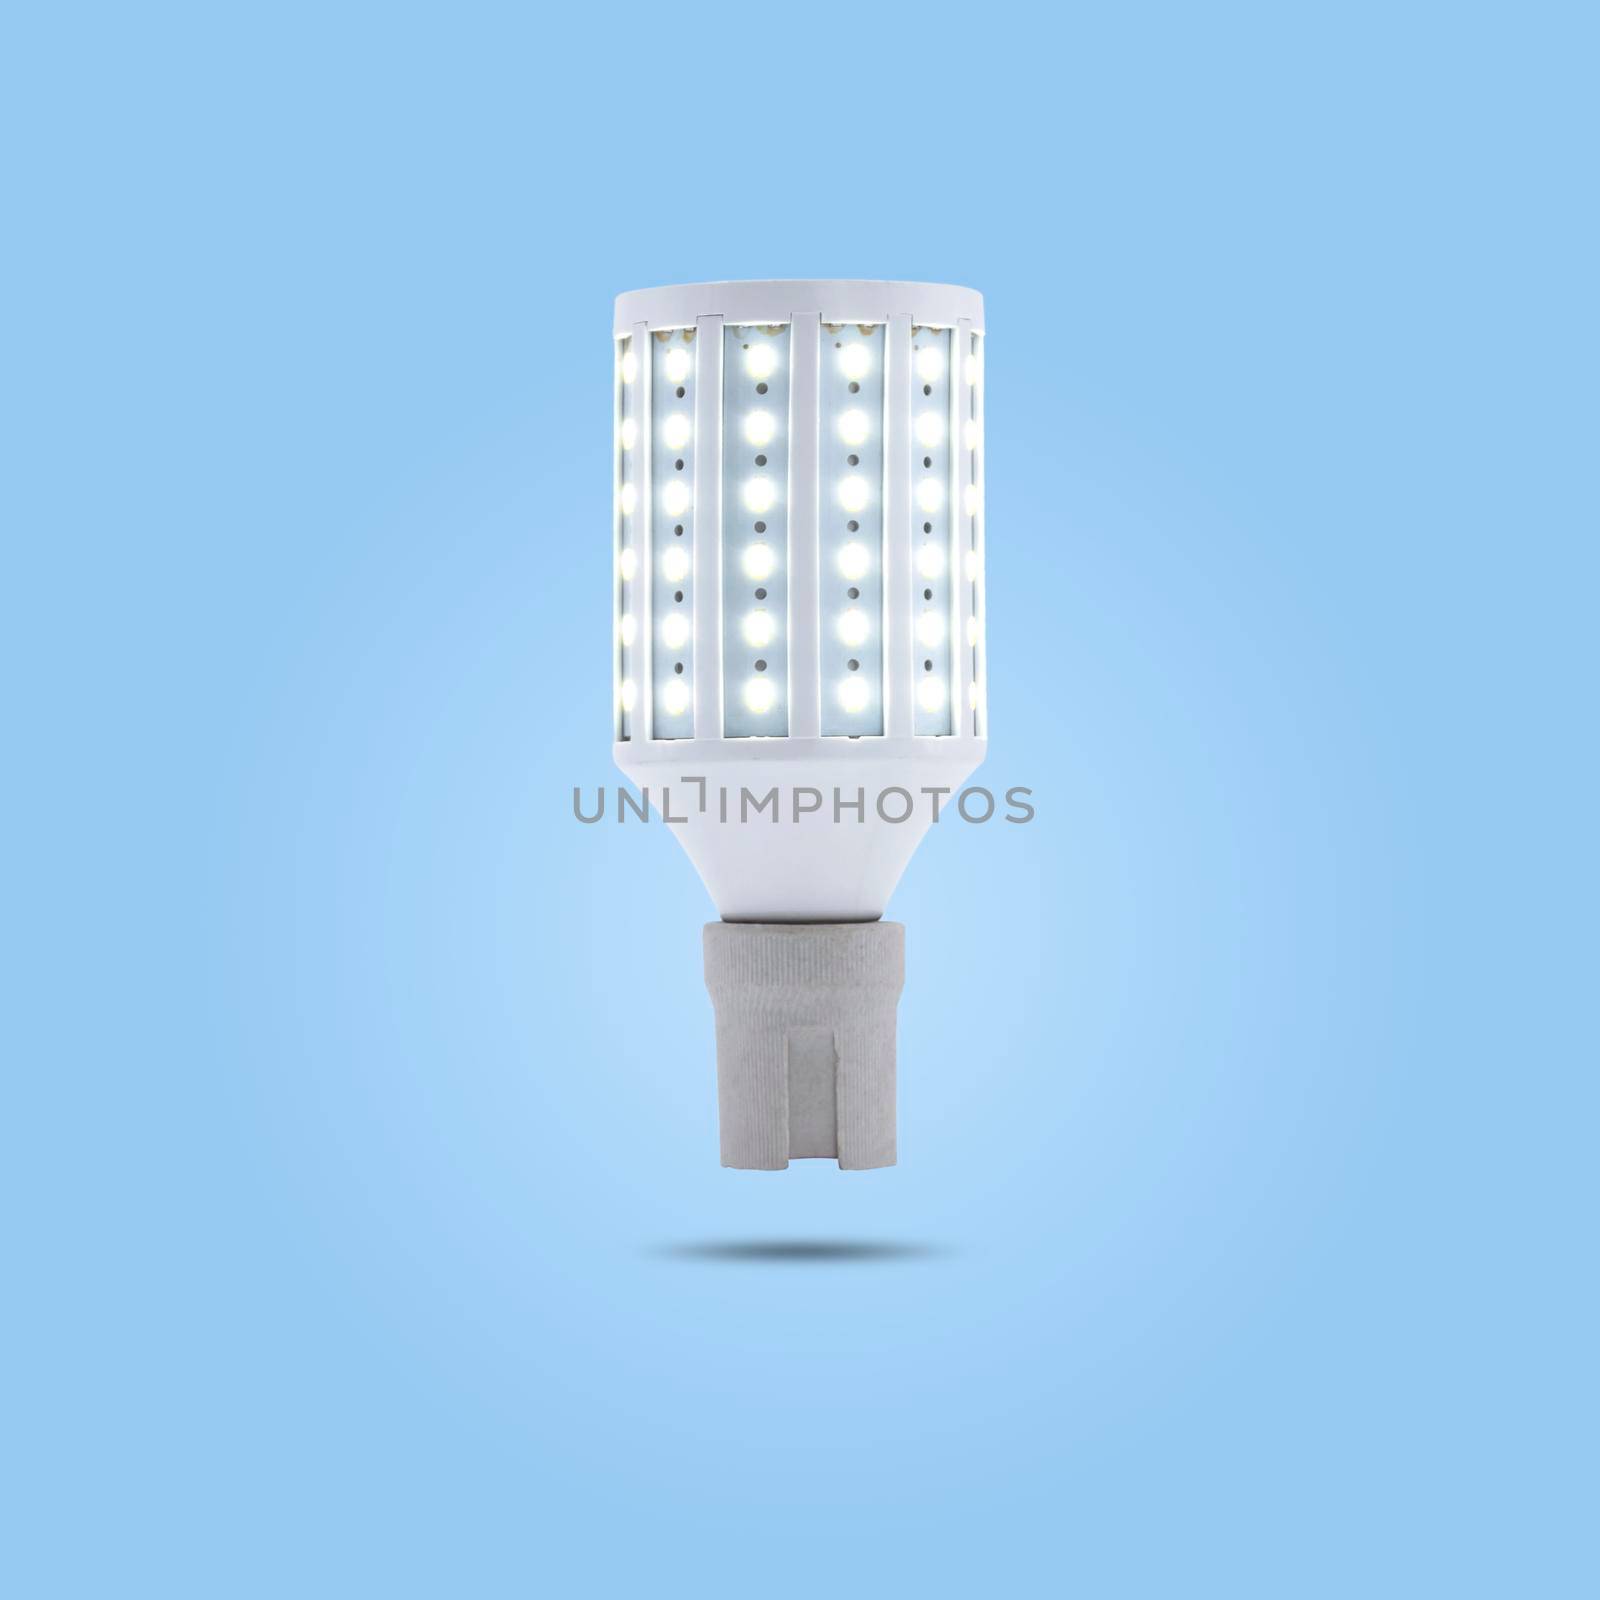 LED energy saving lamp 230v in a ceramic socket isolated on blue pastel color background.